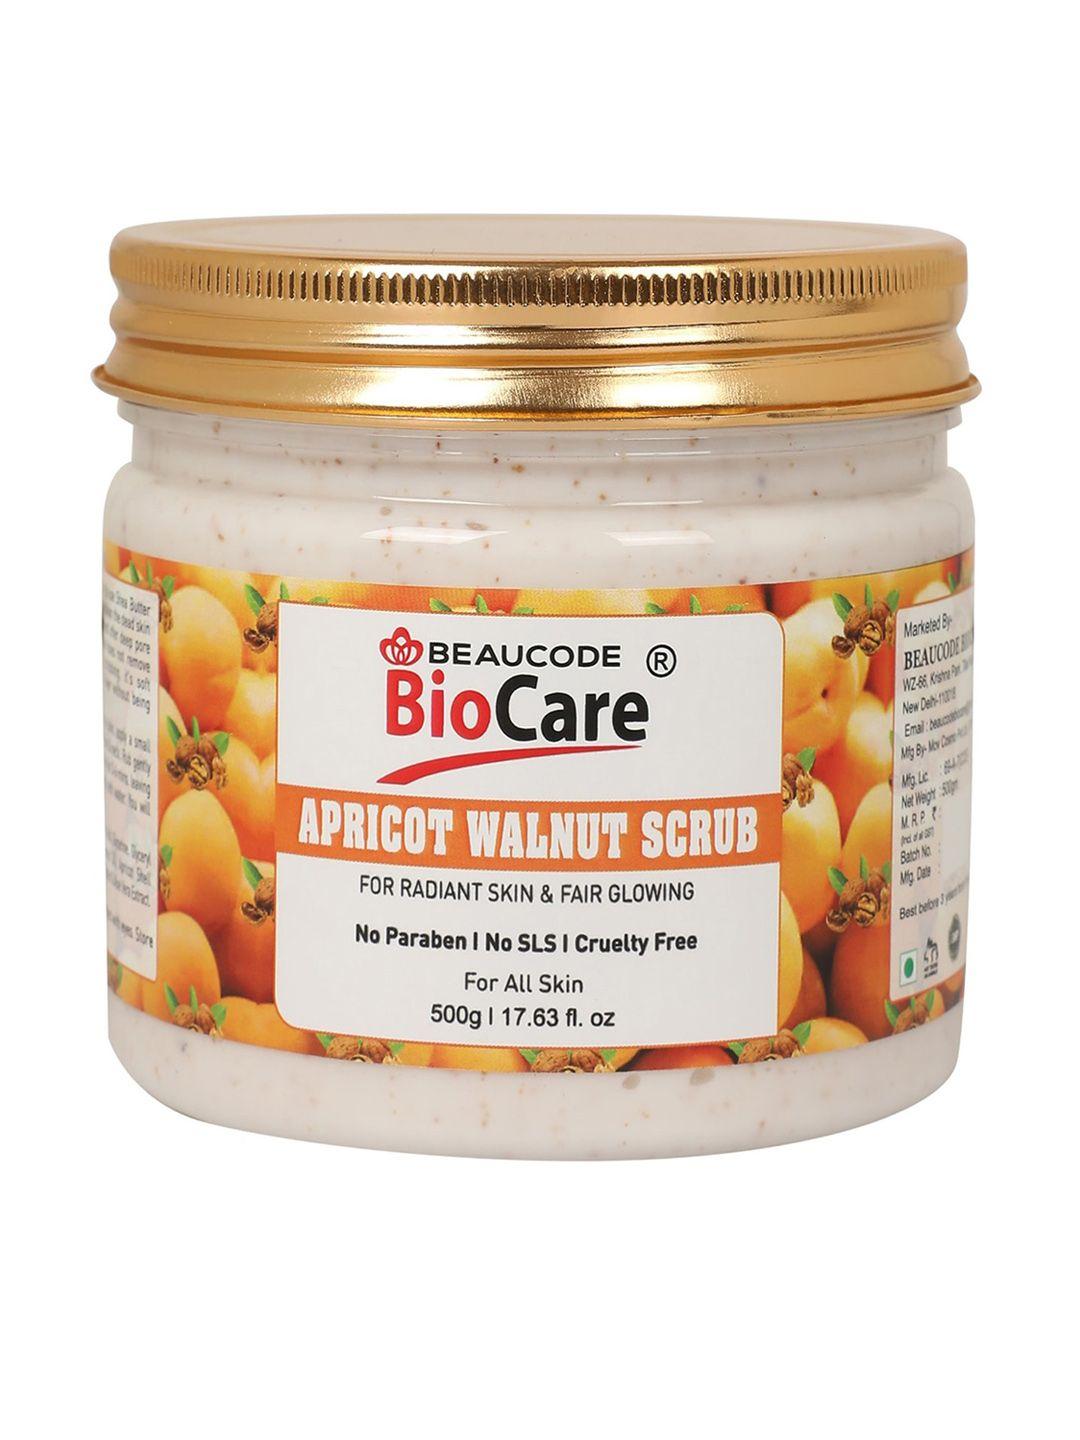 beaucode biocare apricot walnut face scrub for radiant & glowing skin - 500 g